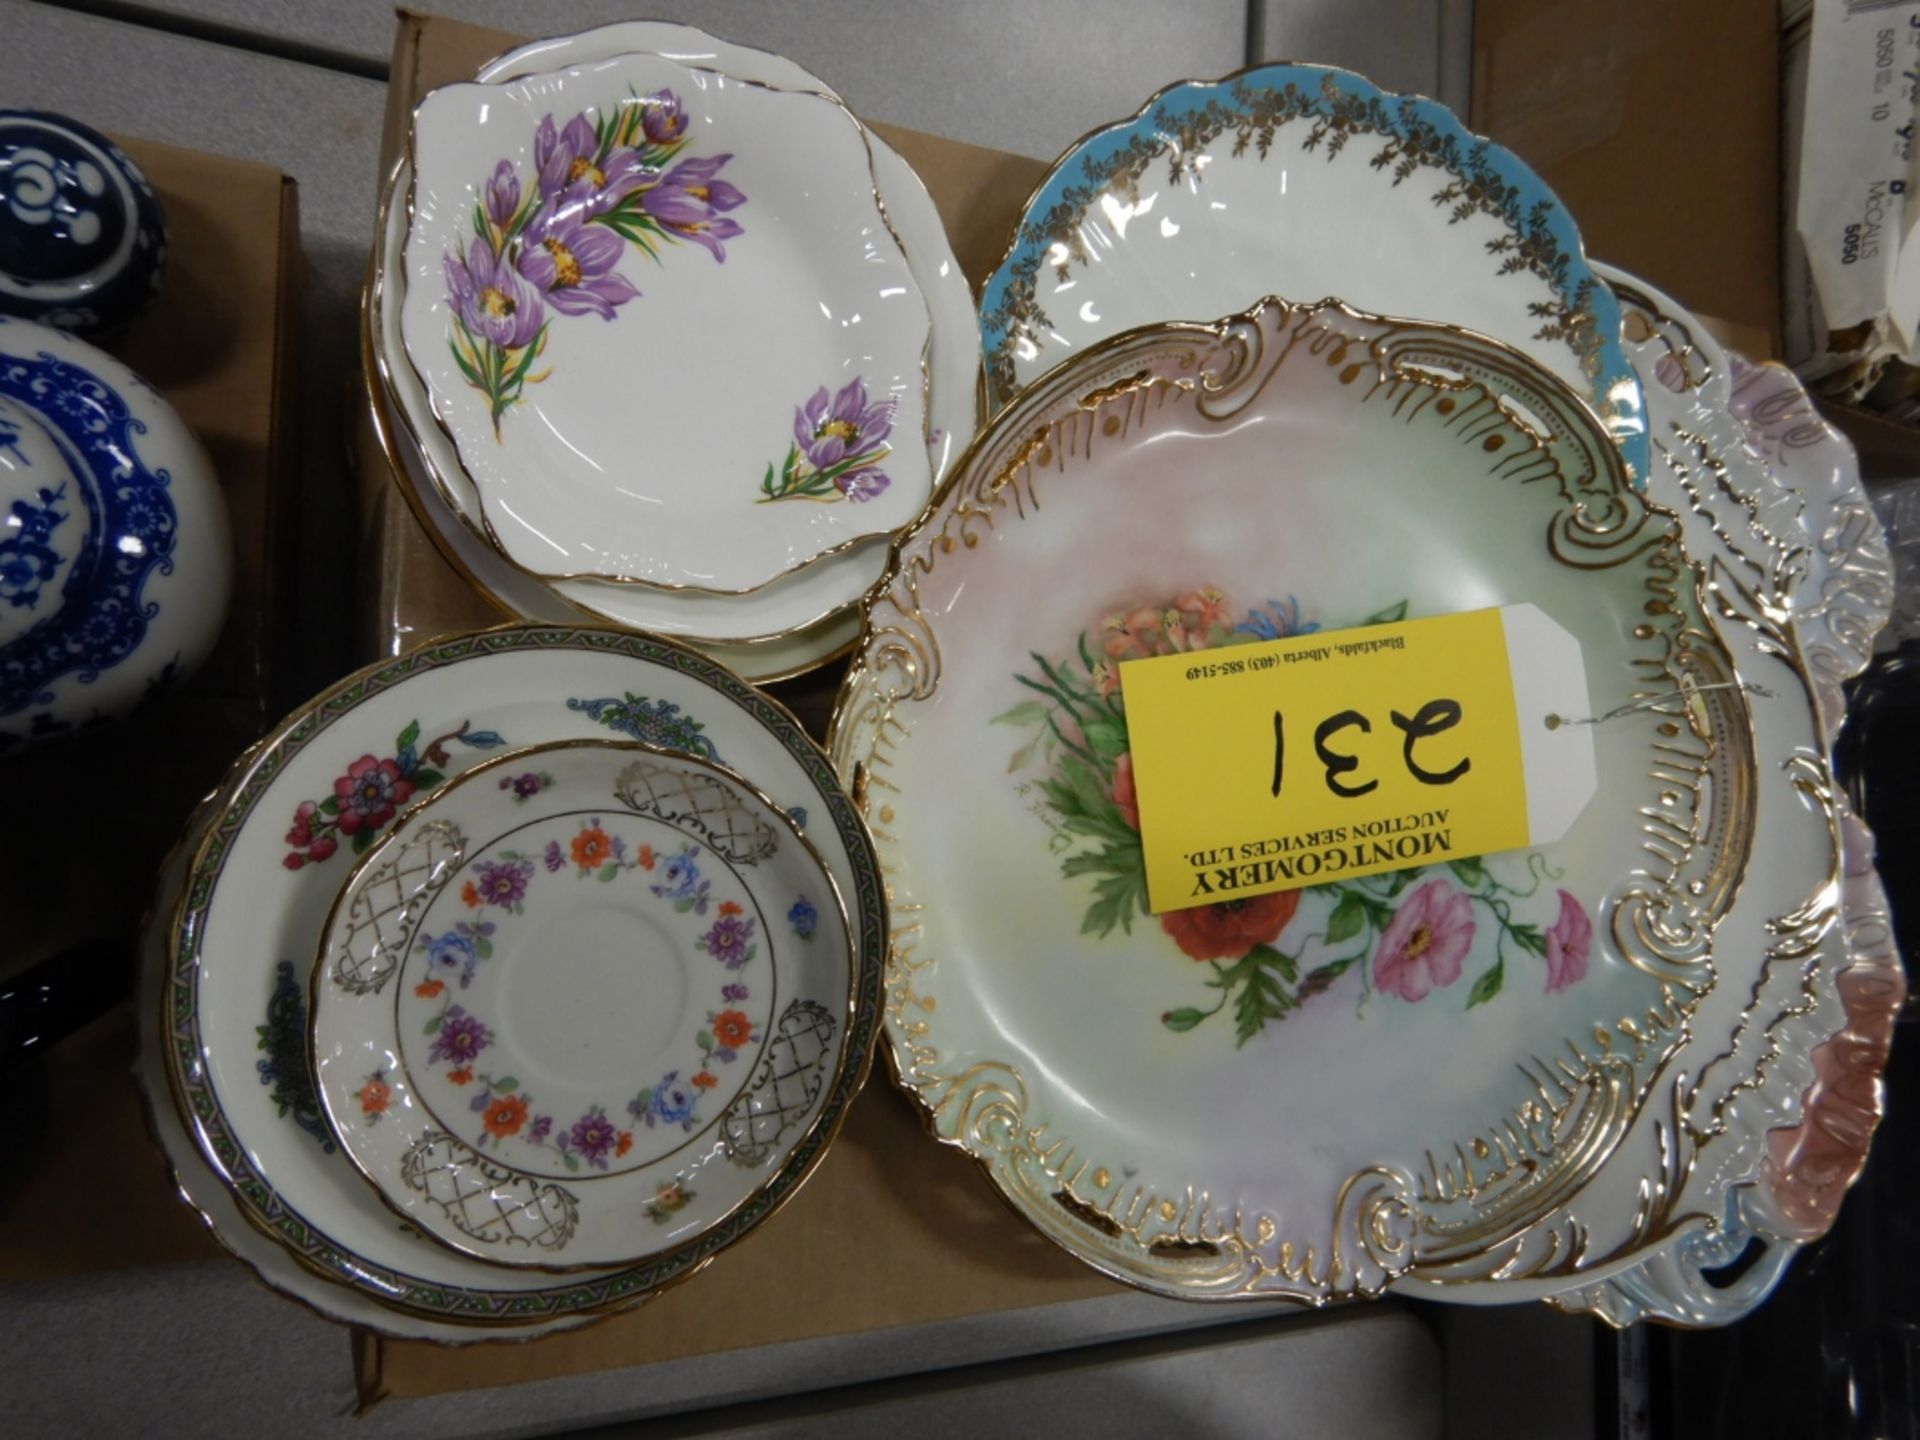 L/O DECORATIVE DISPLAY PLATES AND ACCESSORIES - Image 2 of 3